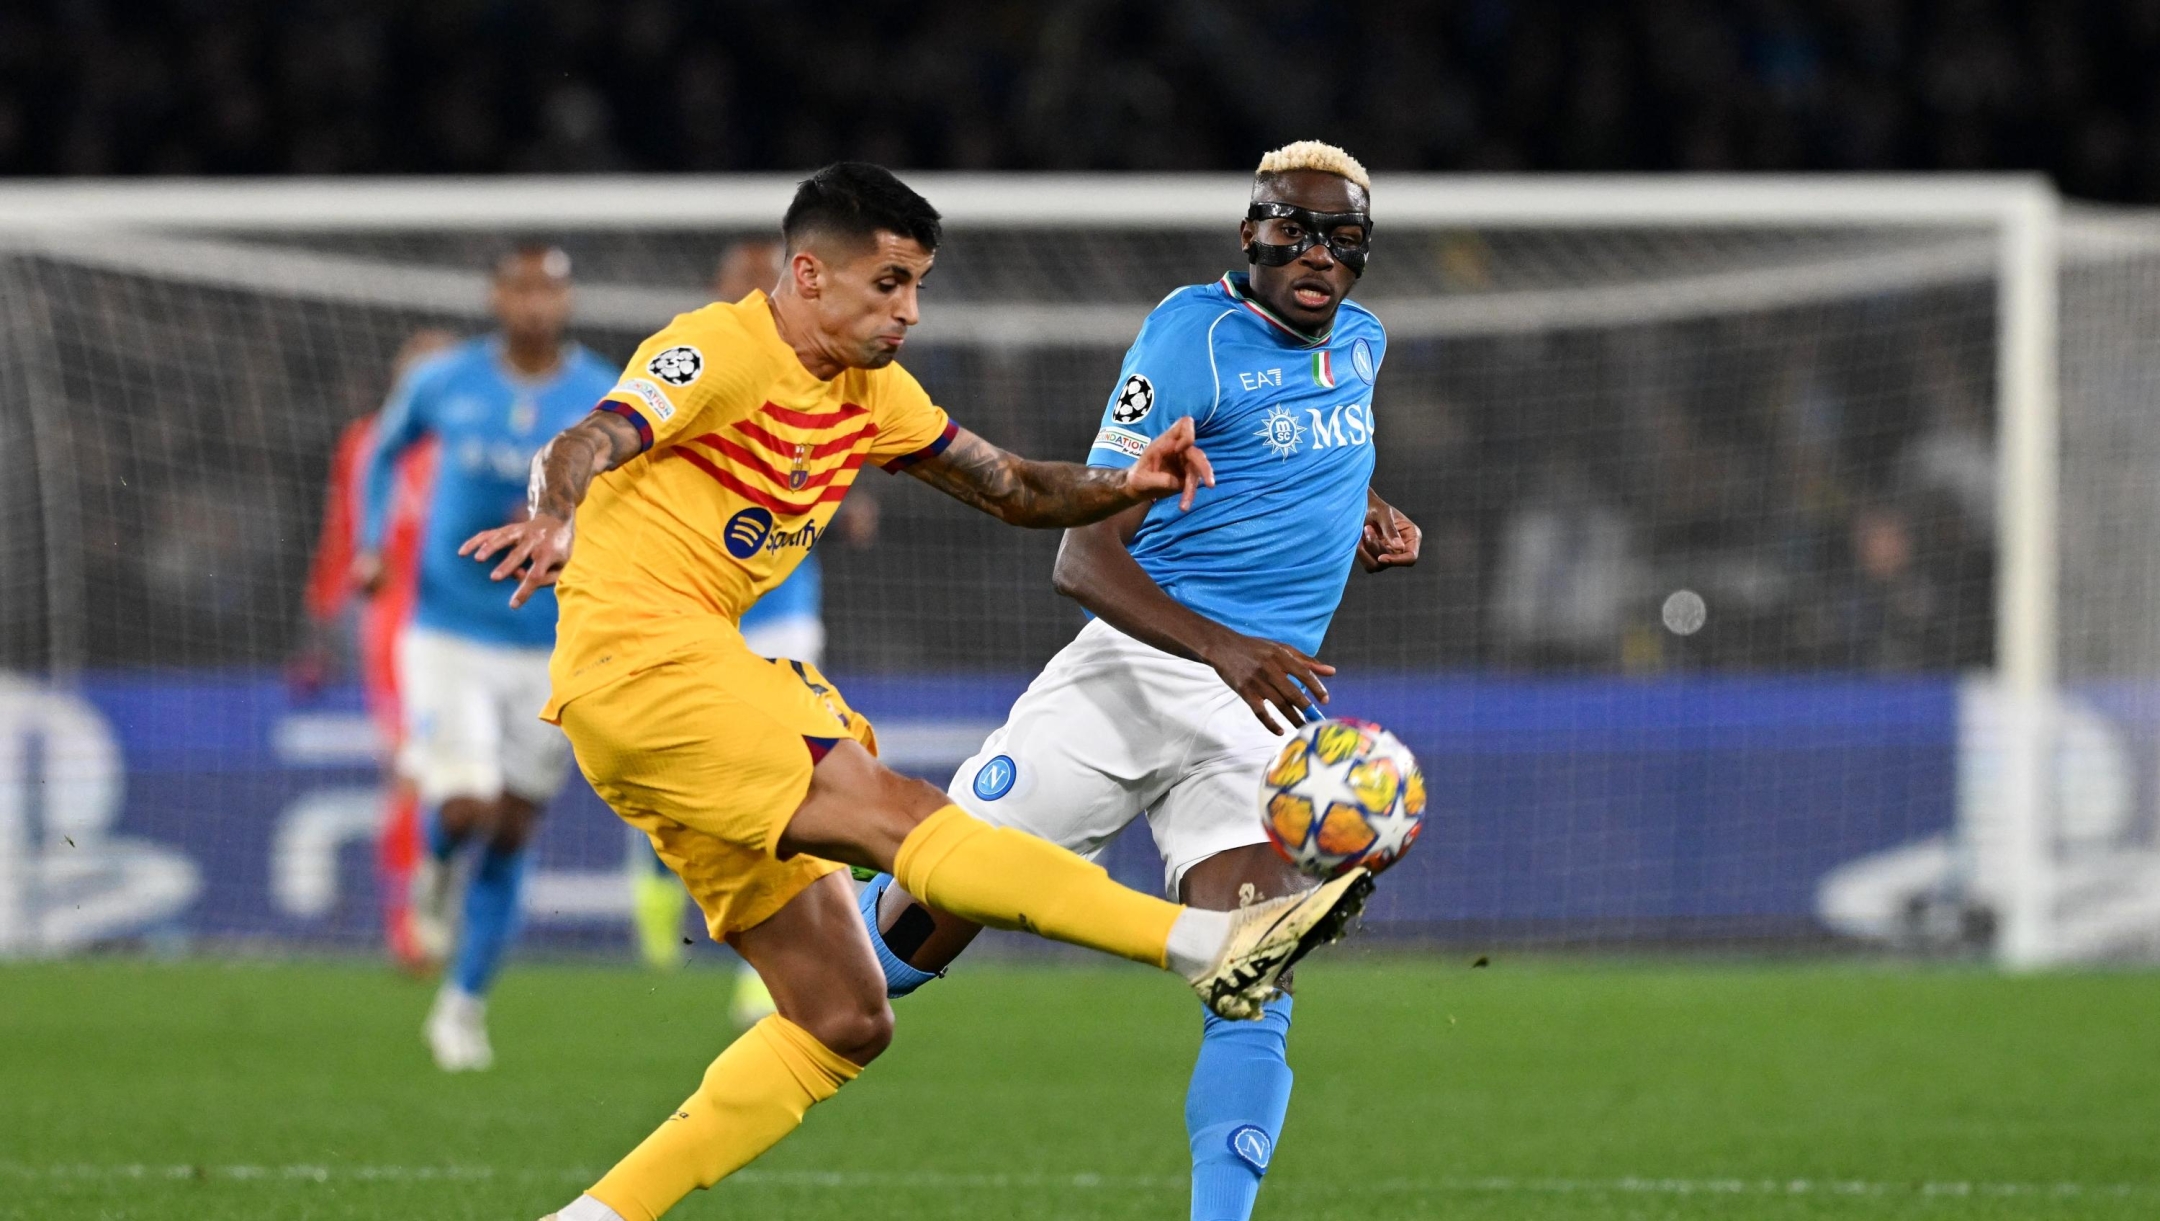 NAPLES, ITALY - FEBRUARY 21: Joao Cancelo of FC Barcelona clears the ball whilst under pressure from Victor Osimhen of SSC Napoli during the UEFA Champions League 2023/24 round of 16 first leg match between SSC Napoli and FC Barcelona at Stadio Diego Armando Maradona on February 21, 2024 in Naples, Italy. (Photo by Francesco Pecoraro/Getty Images)